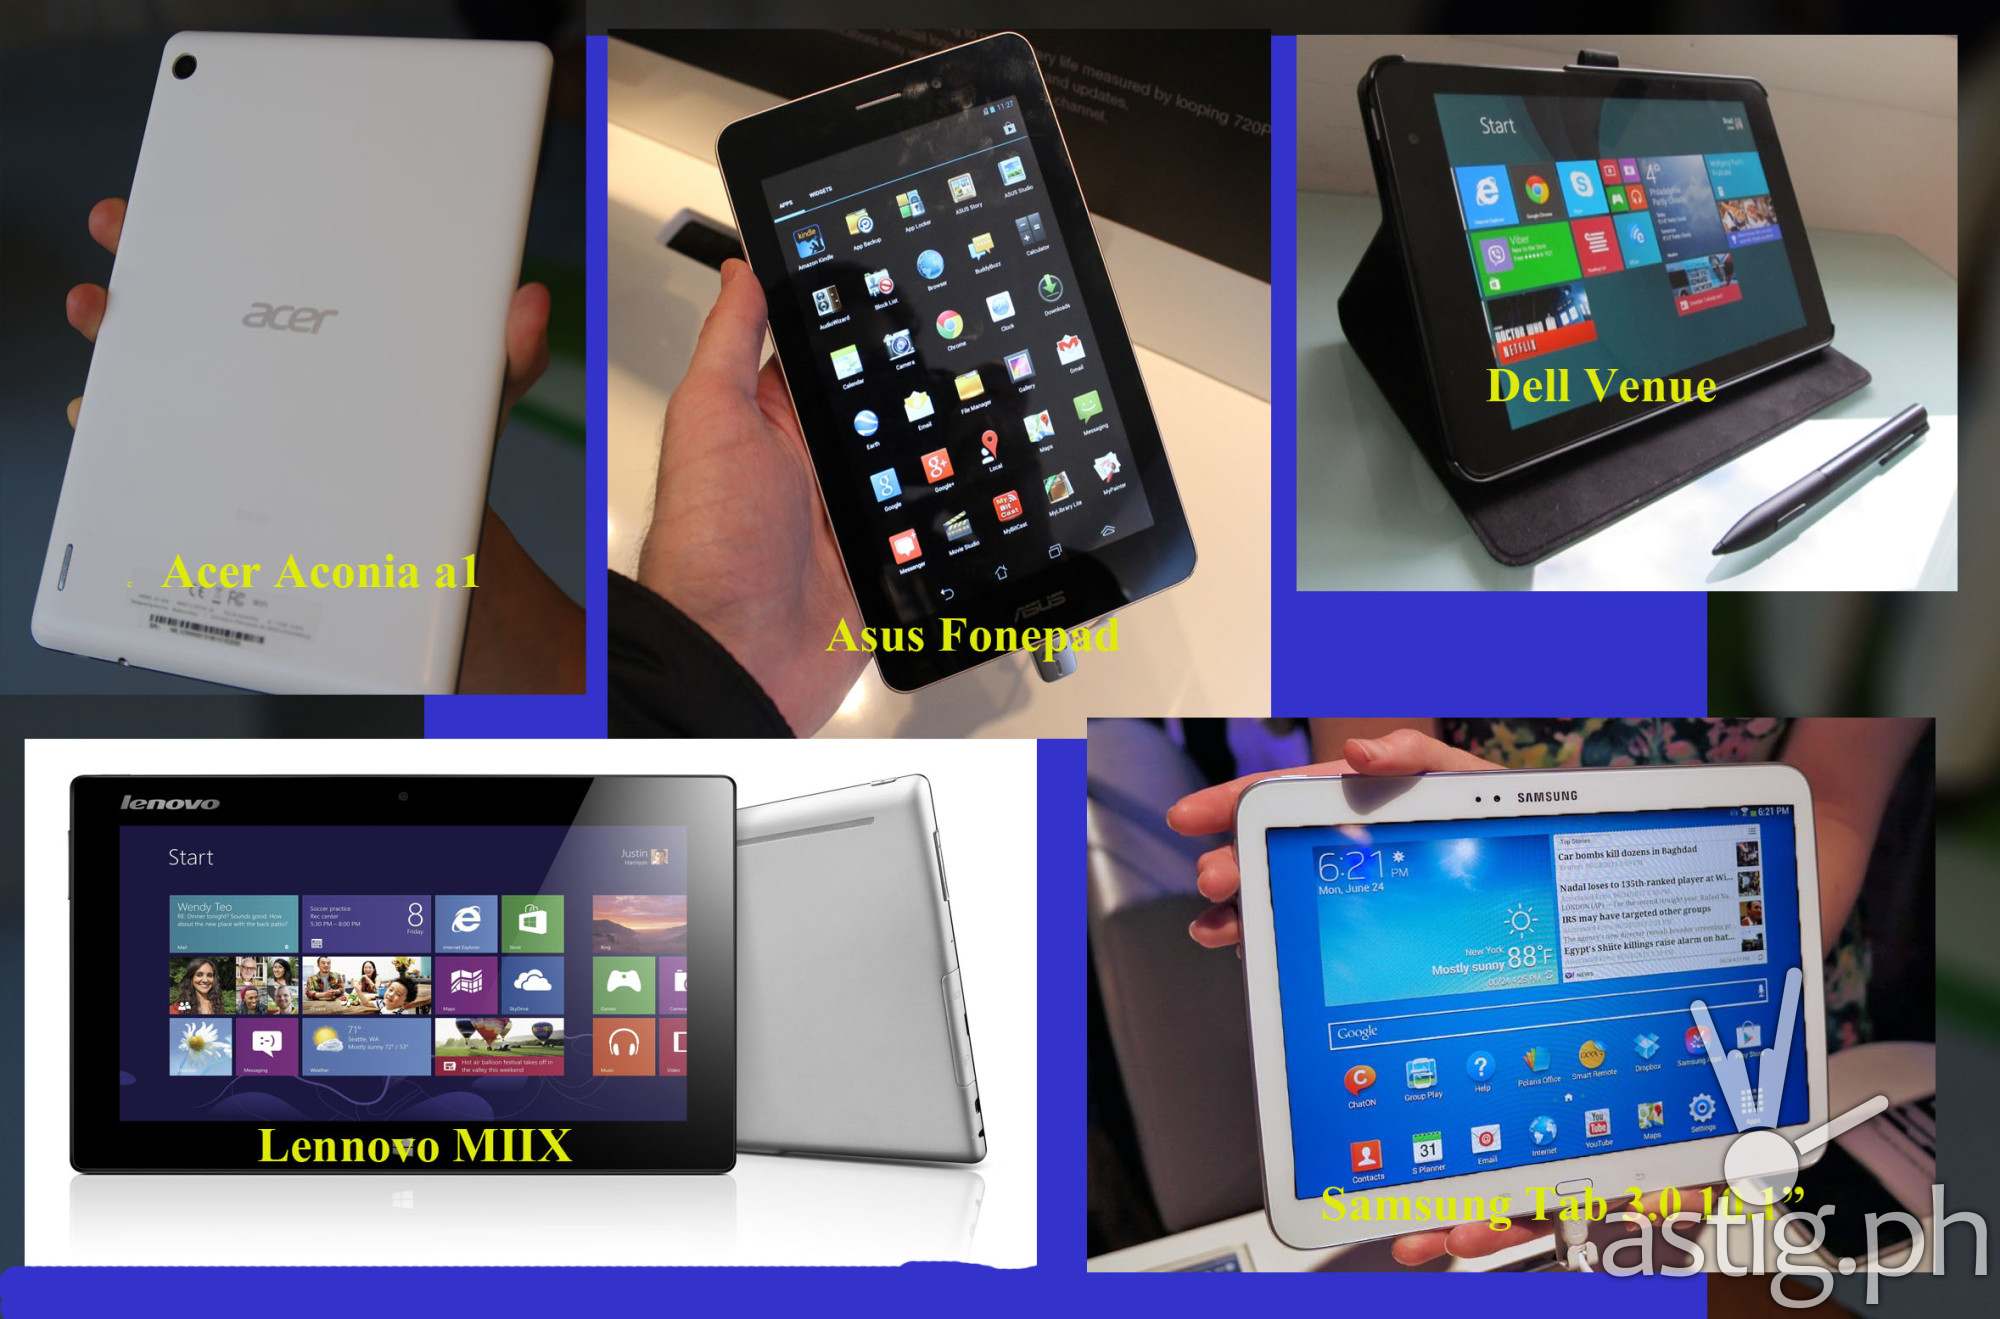 Acer Iconia a1 and w4, Asus Fonepad and Memopad, Dell Venue, Lennovo MIIX and Samsung Tab 3 10.1"